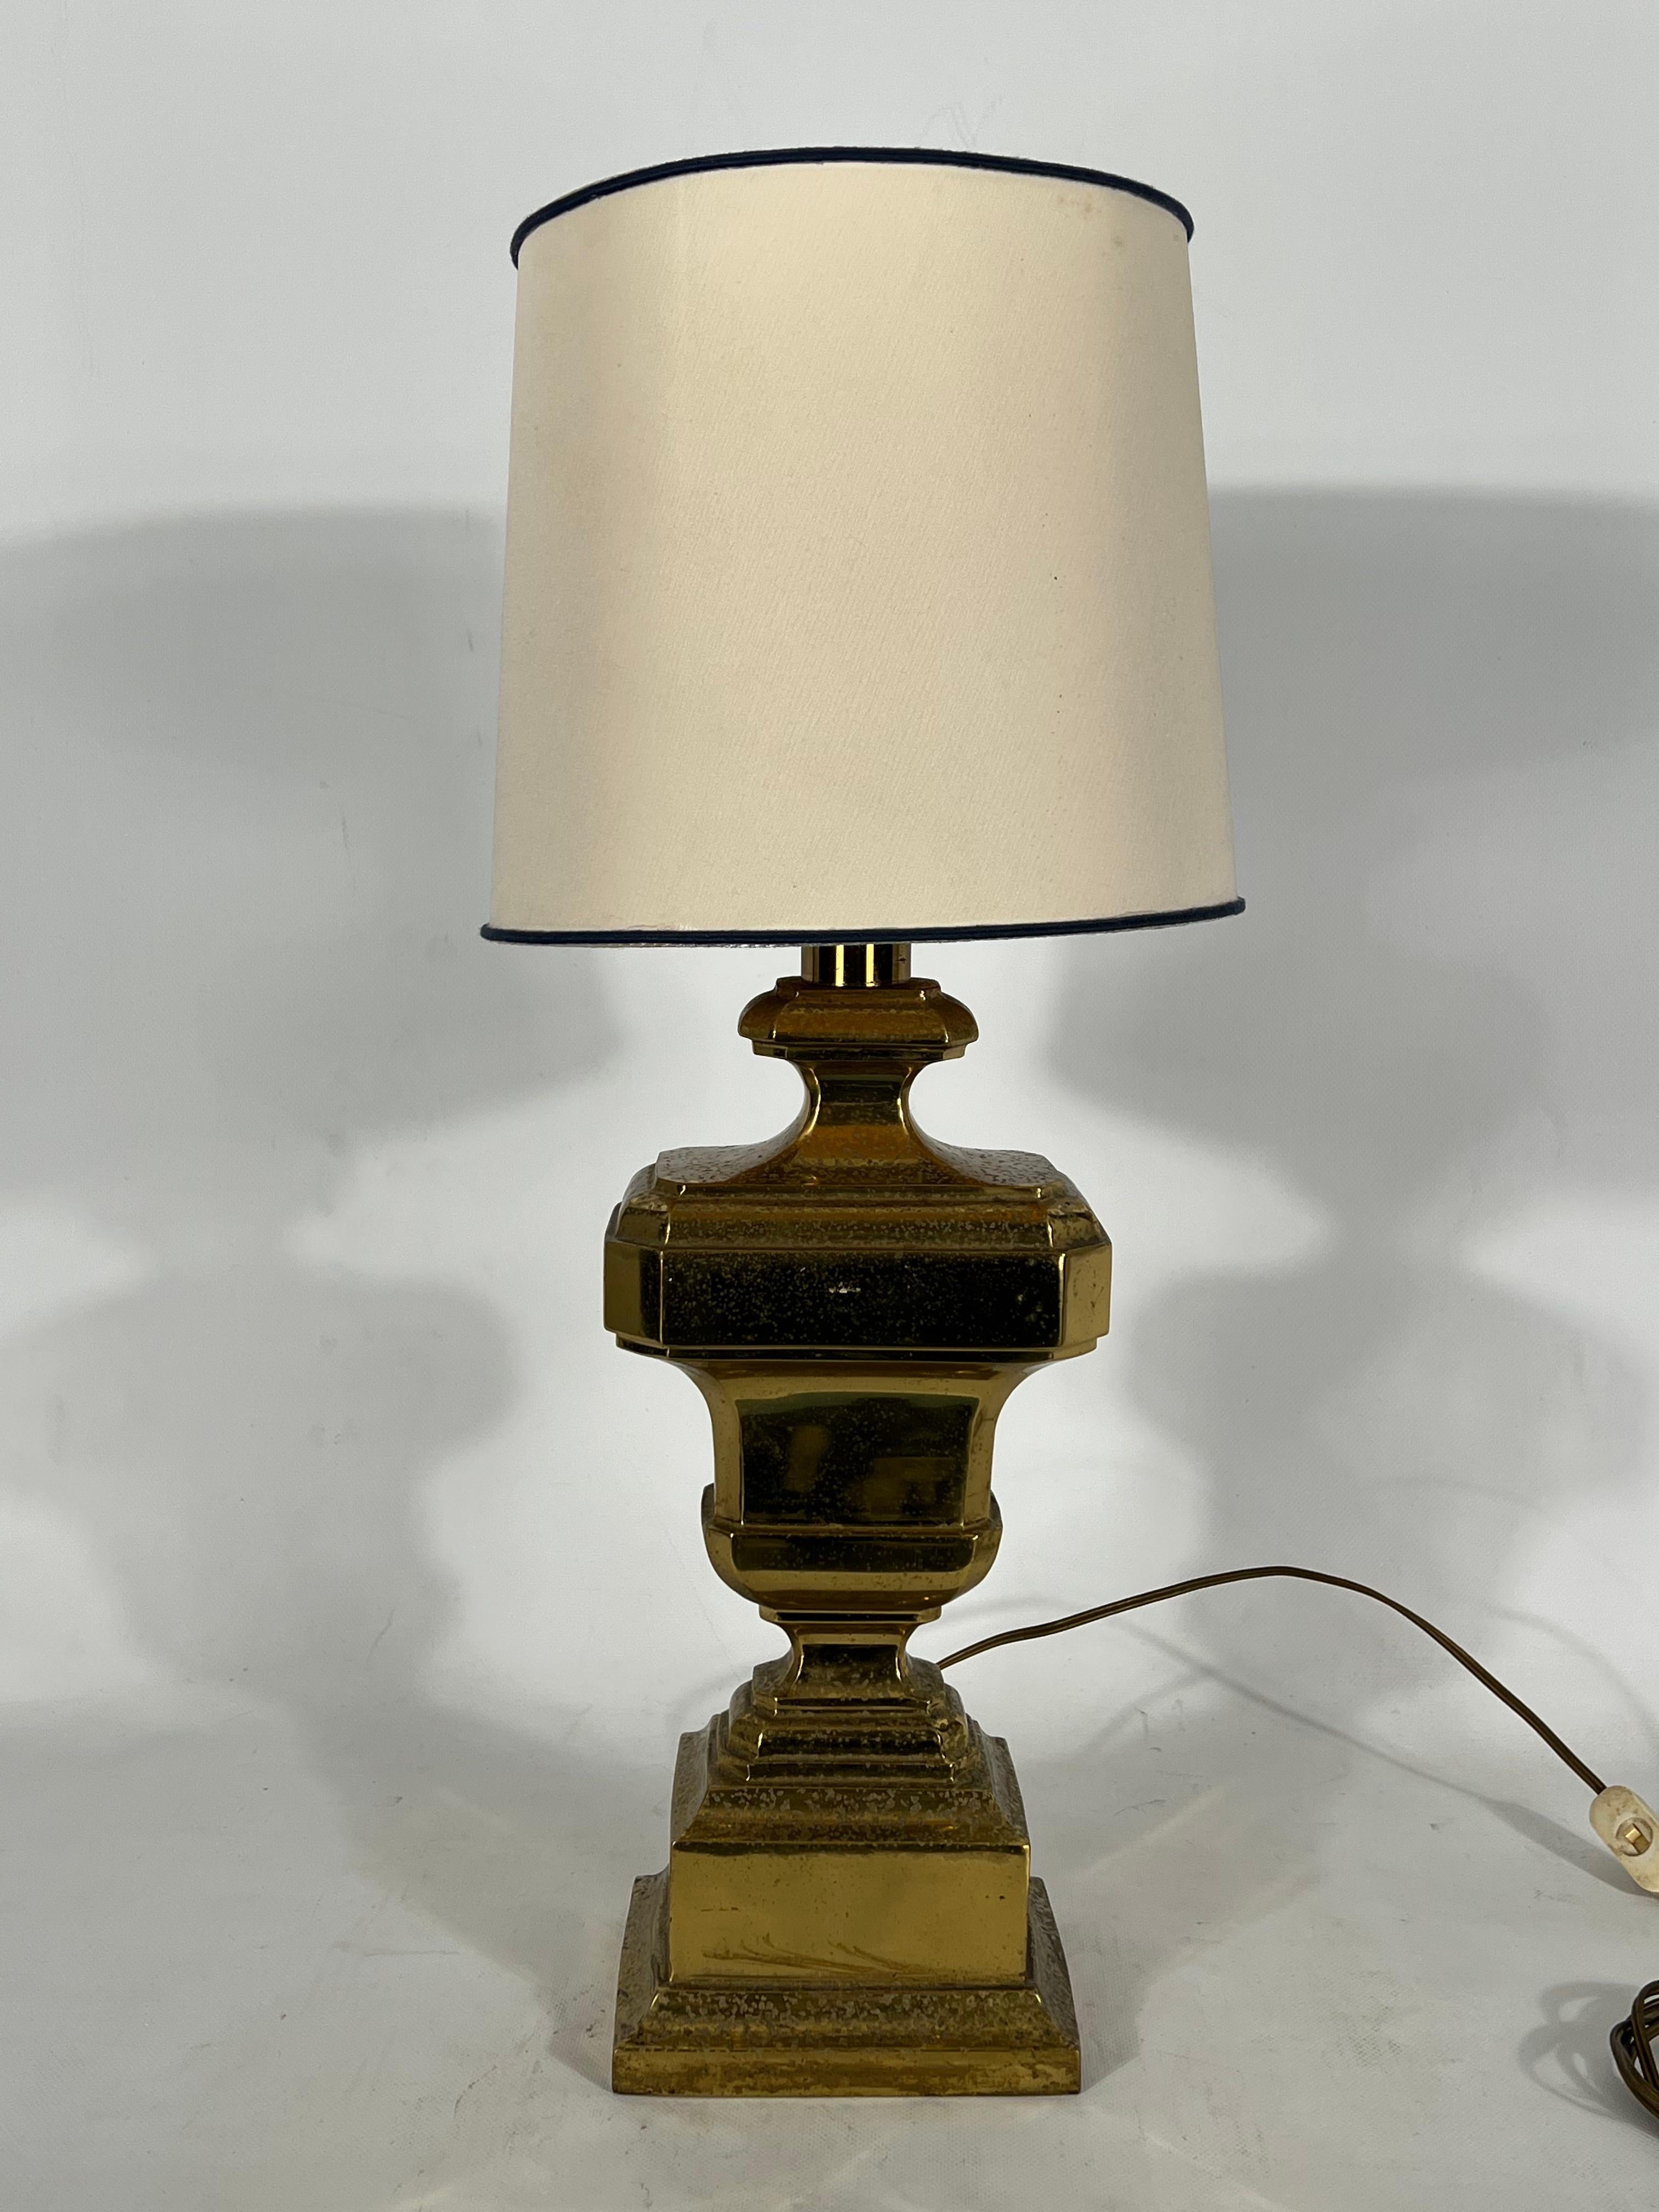 Good vintage condition with original patina and spots on the solid brass. Produced in Italy during the late 50s. H tot with lampshade 70 (cm). Full working with EU standard, adaptable on demand for USA standard.
 